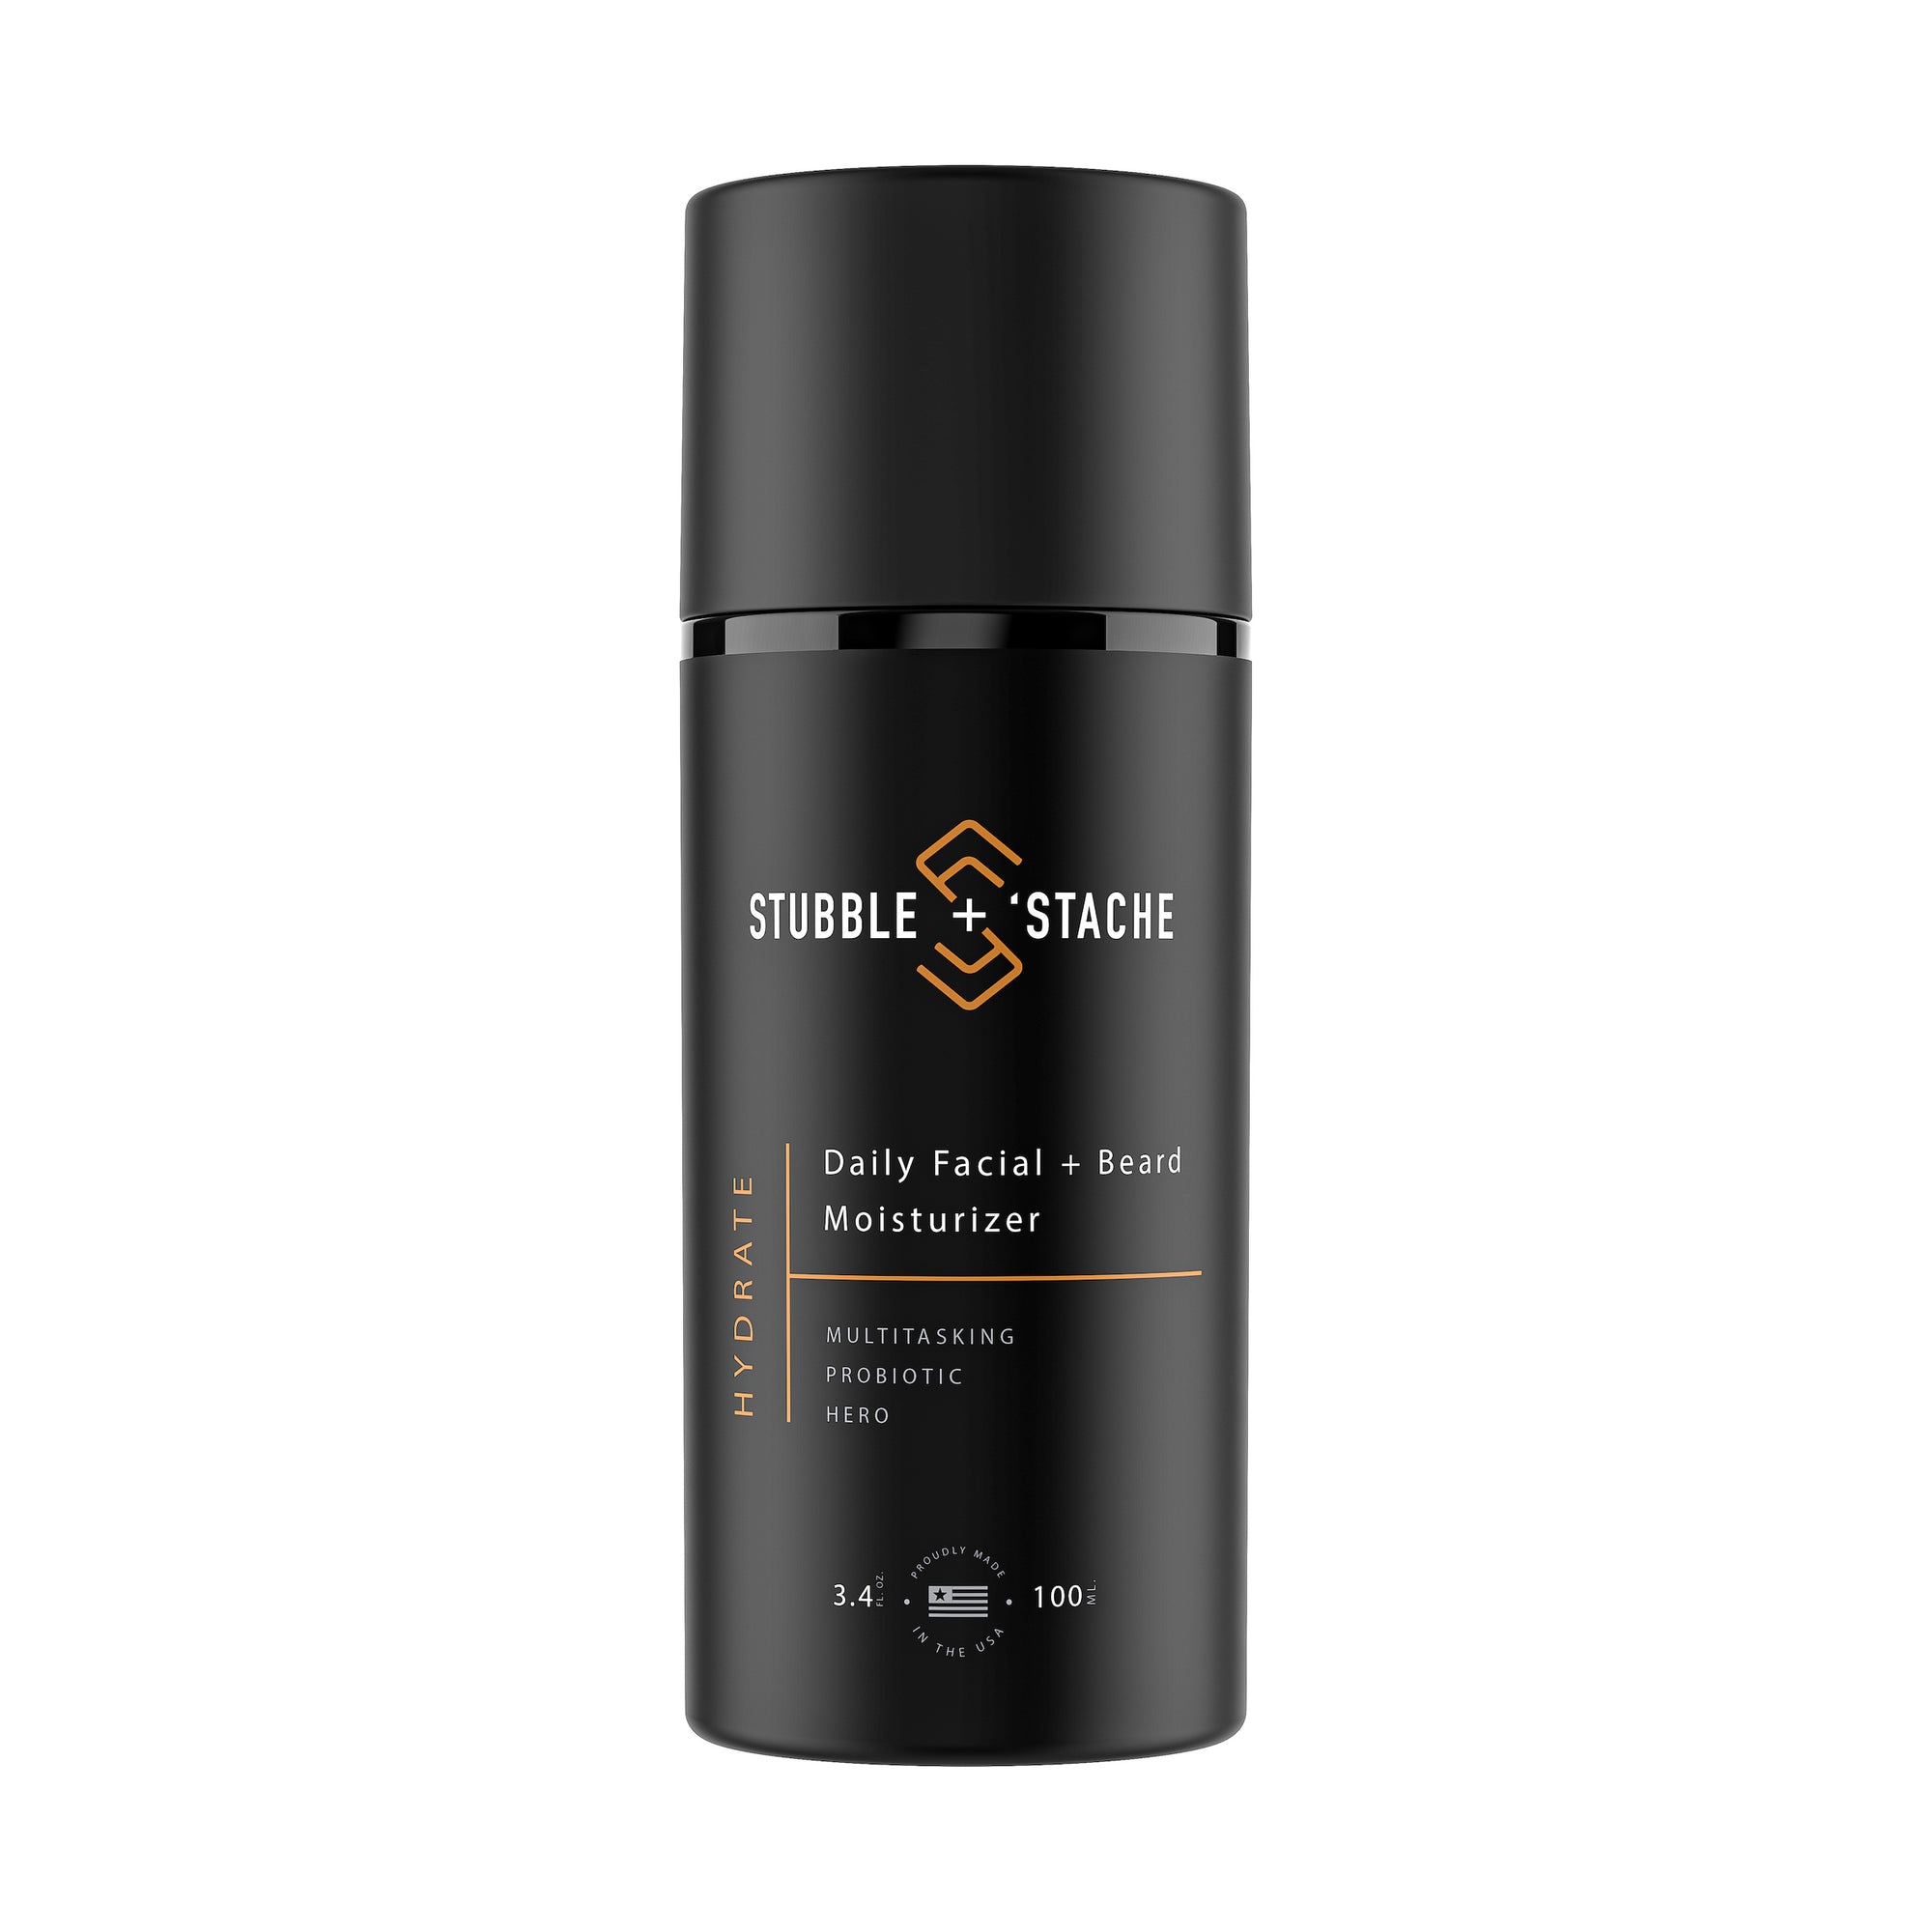 Hydrate Daily Face and beard moisturizer for men. Daily facial moisturizer for men with facial hair